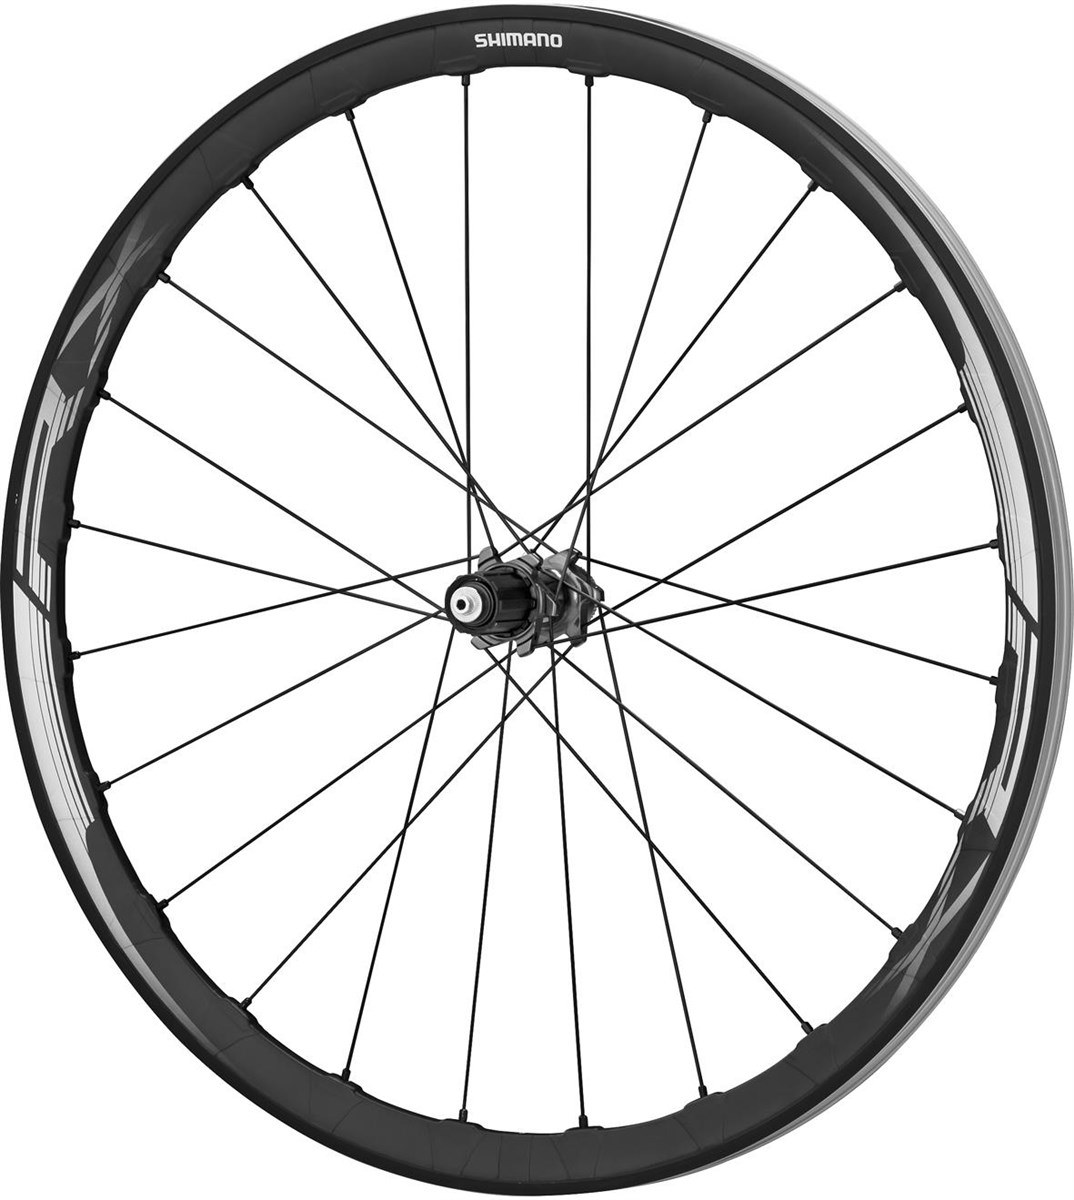 Shimano WH-RX830 Disc Road Wheel - Tubeless Ready Clincher 35 mm - 11-Speed - Rear